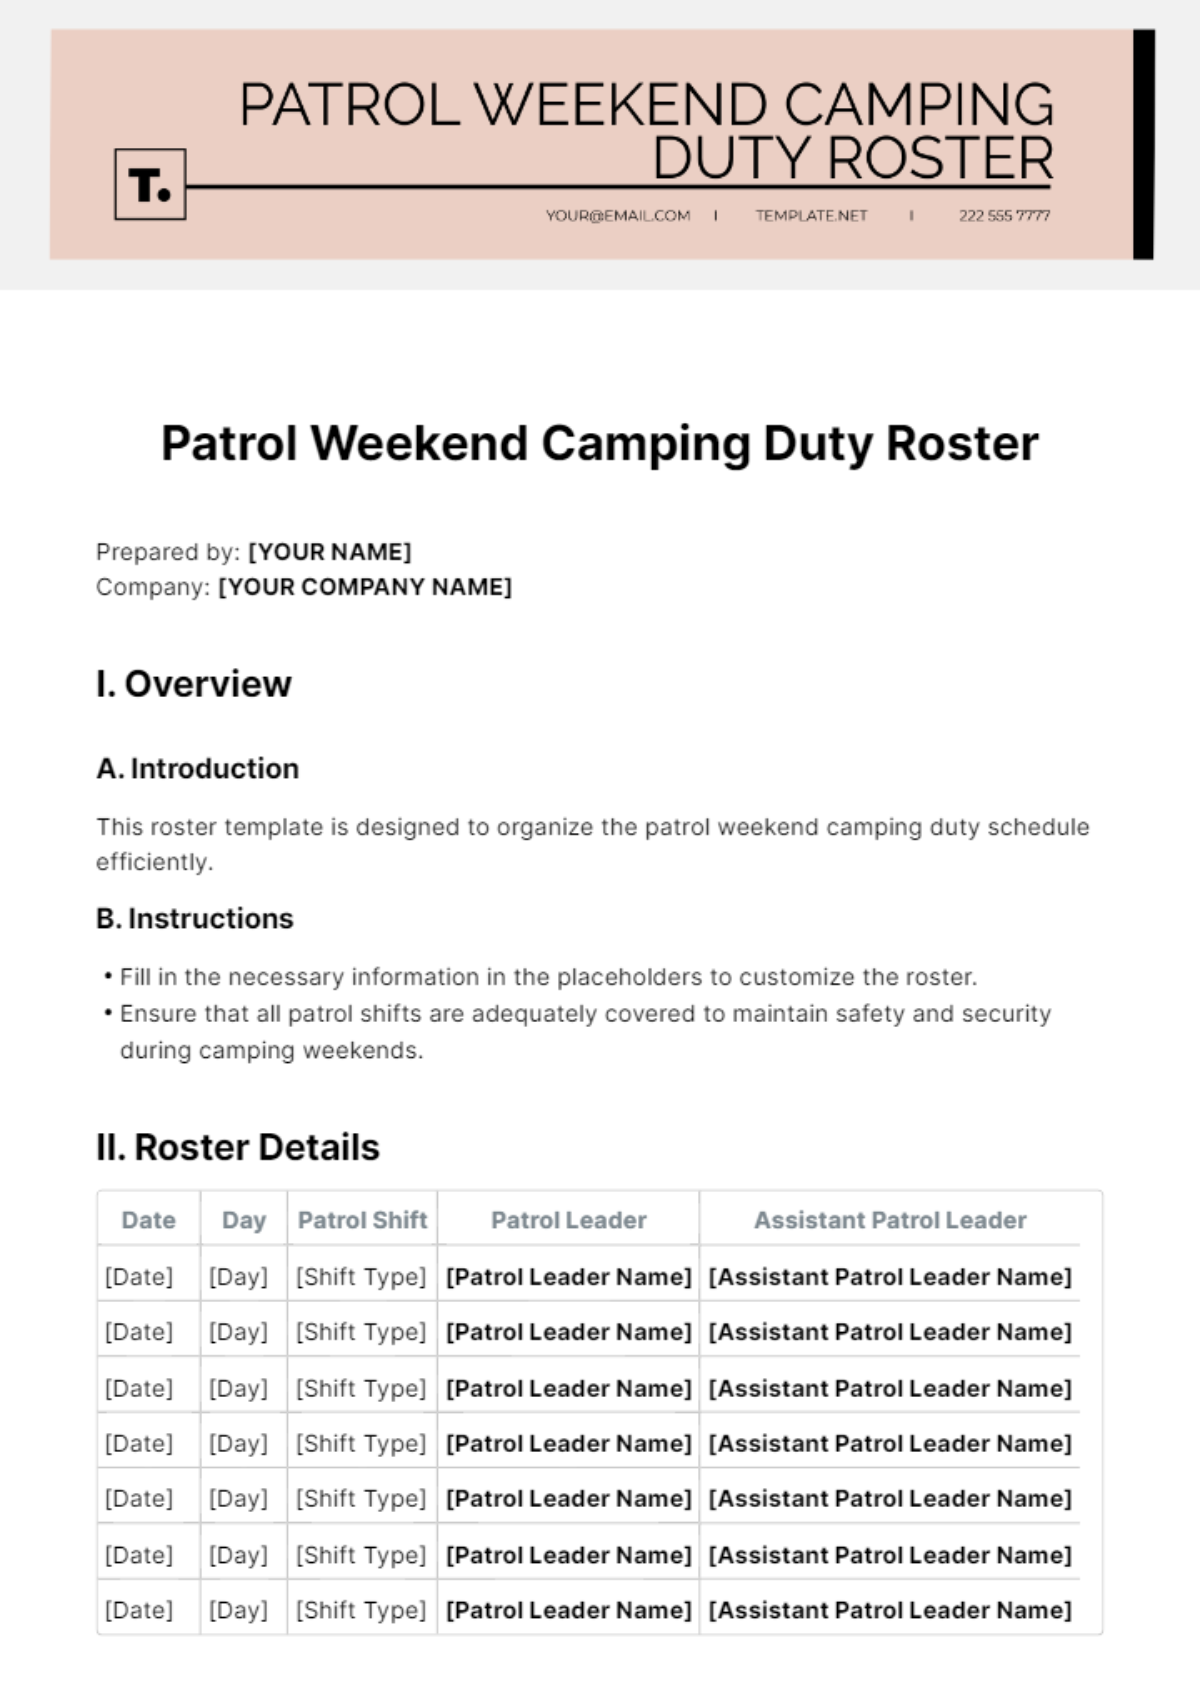 Patrol Weekend Camping Duty Roster Template